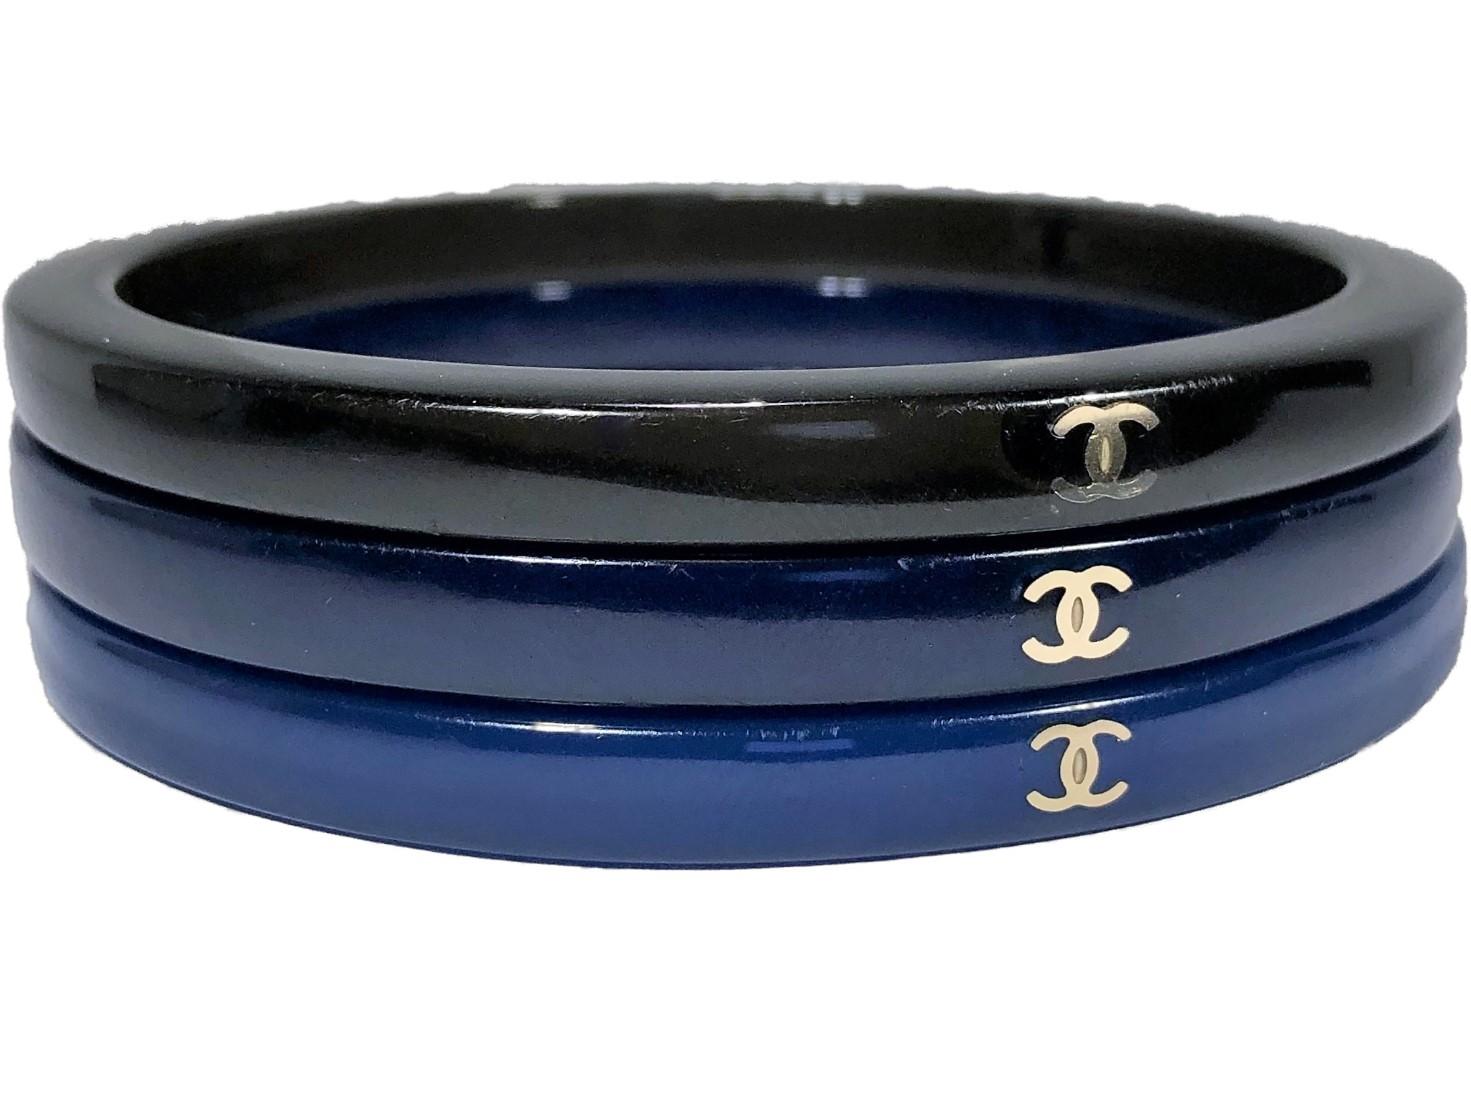 This set of three CHANEL bangles was released as part of the 2007 Cruise collection. All are imbedded with the CHANEL crossed C logo at three points around the circumference. Colors are medium blue, dark blue,  and black. Fits medium to large wrist